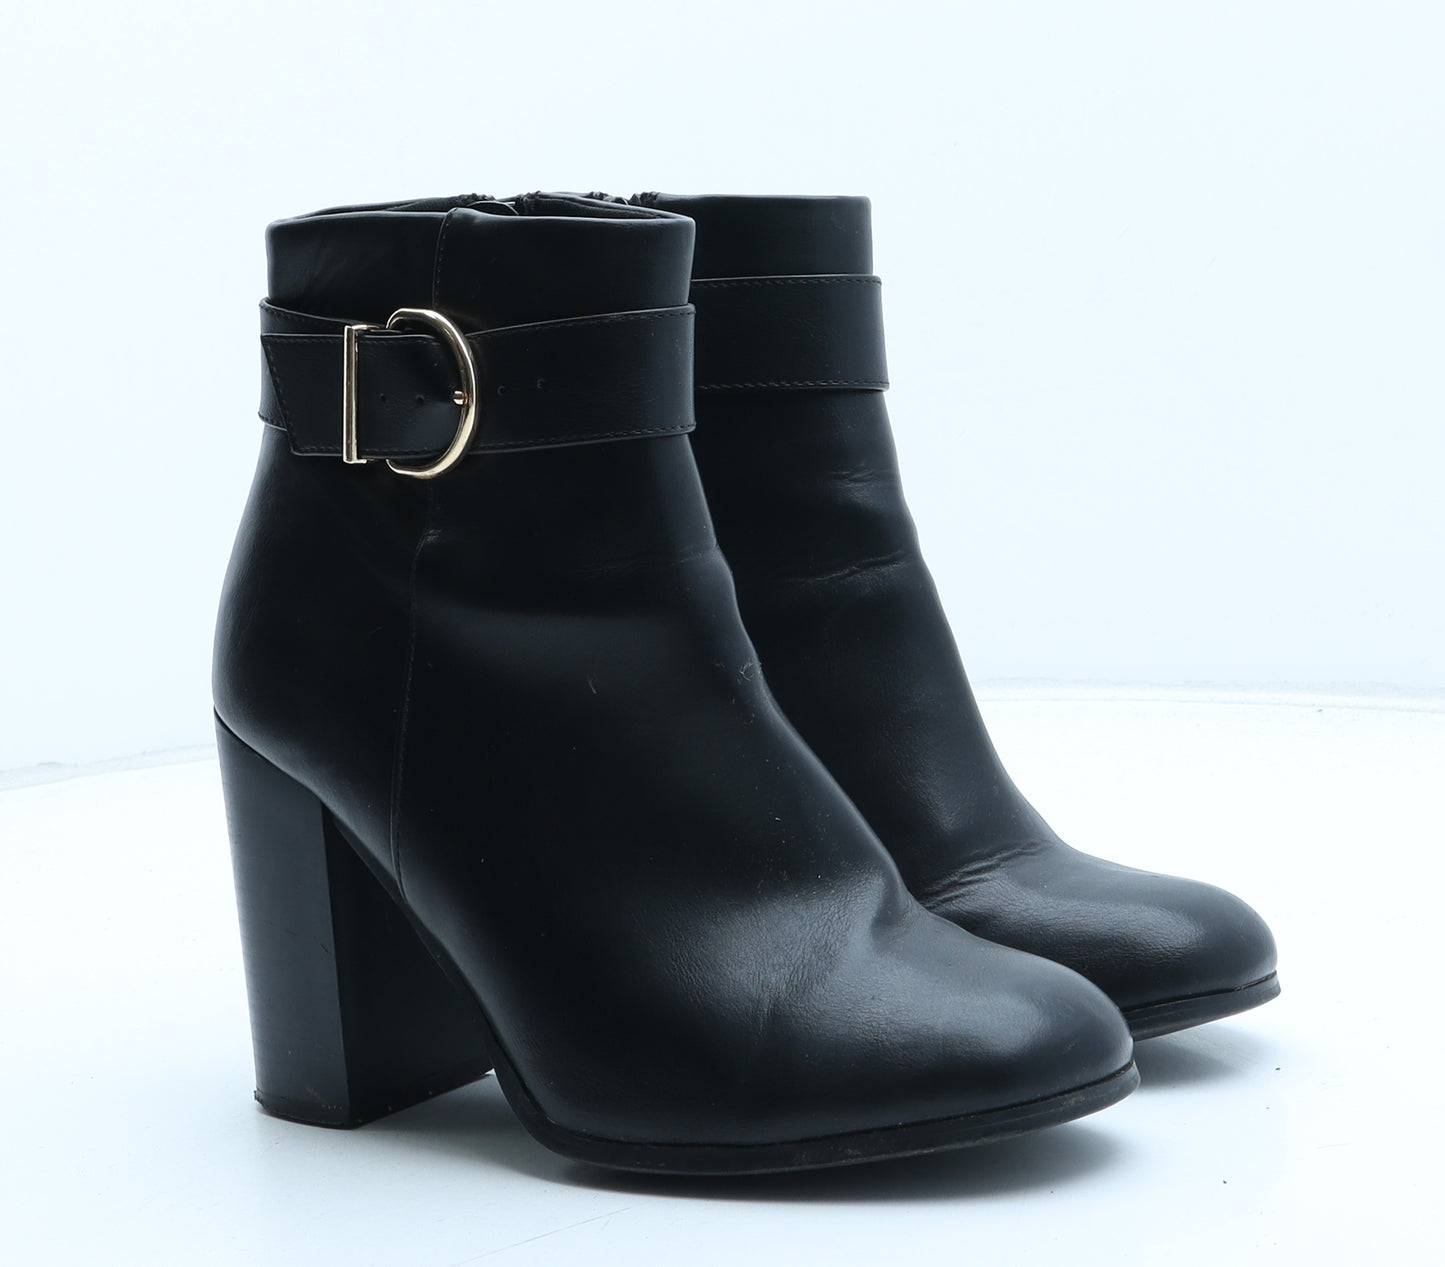 ASOS Womens Black Synthetic Bootie Boot UK